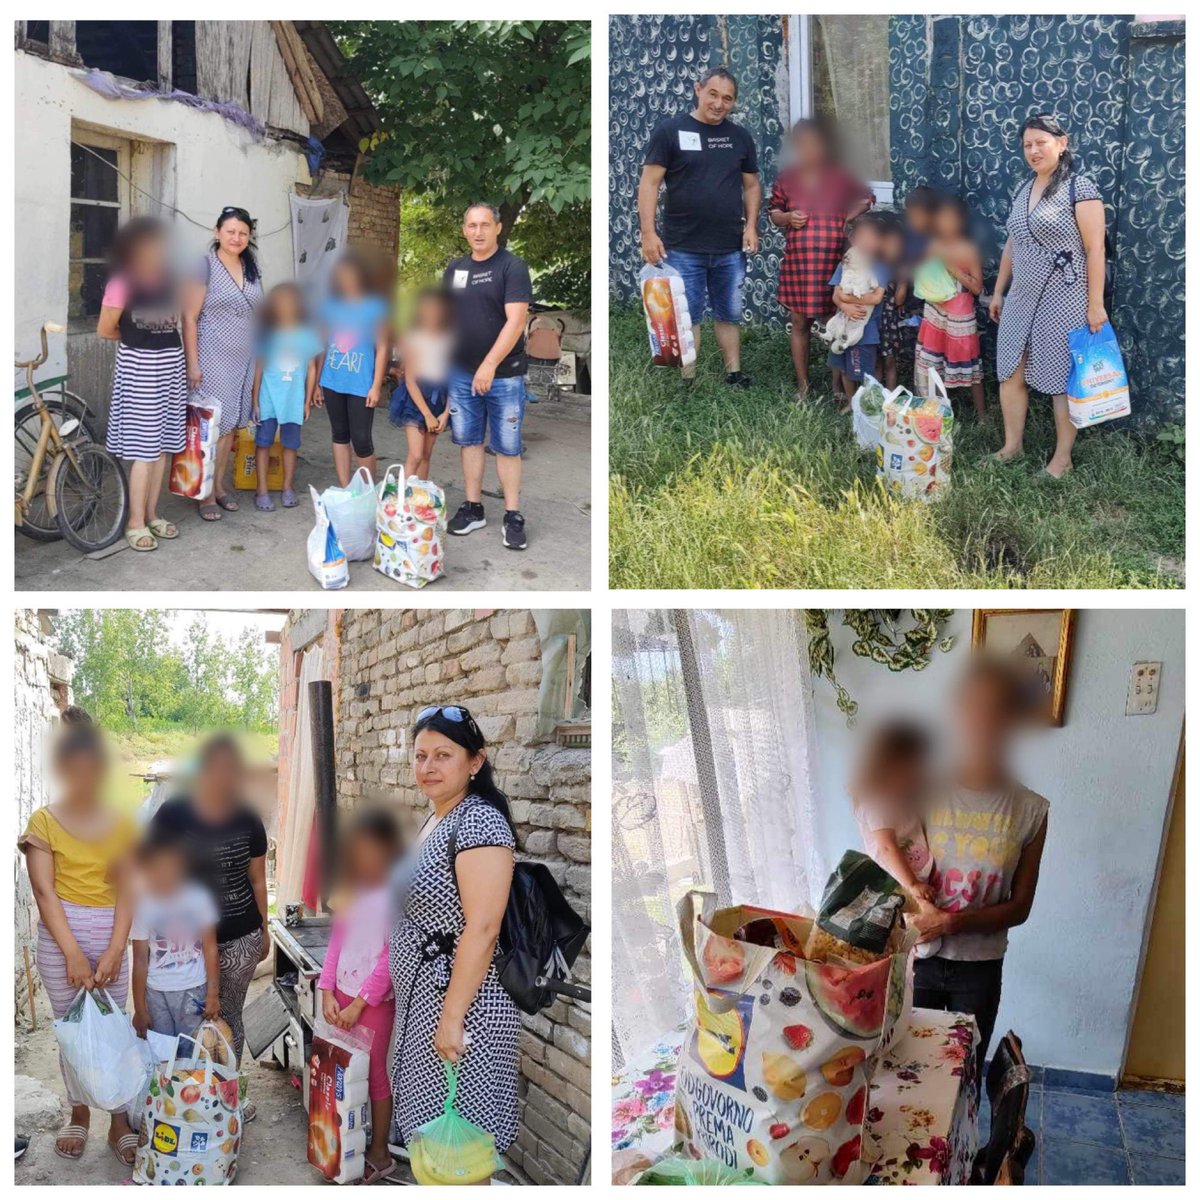 Four families in the village of Kucura received their monthly food packages this week! 🙌🏼

*For the privacy of the families in our program, we have decided to blur their faces going forward.

#serbia #hungernomore  #feedthehungry  #lovelookslikethis